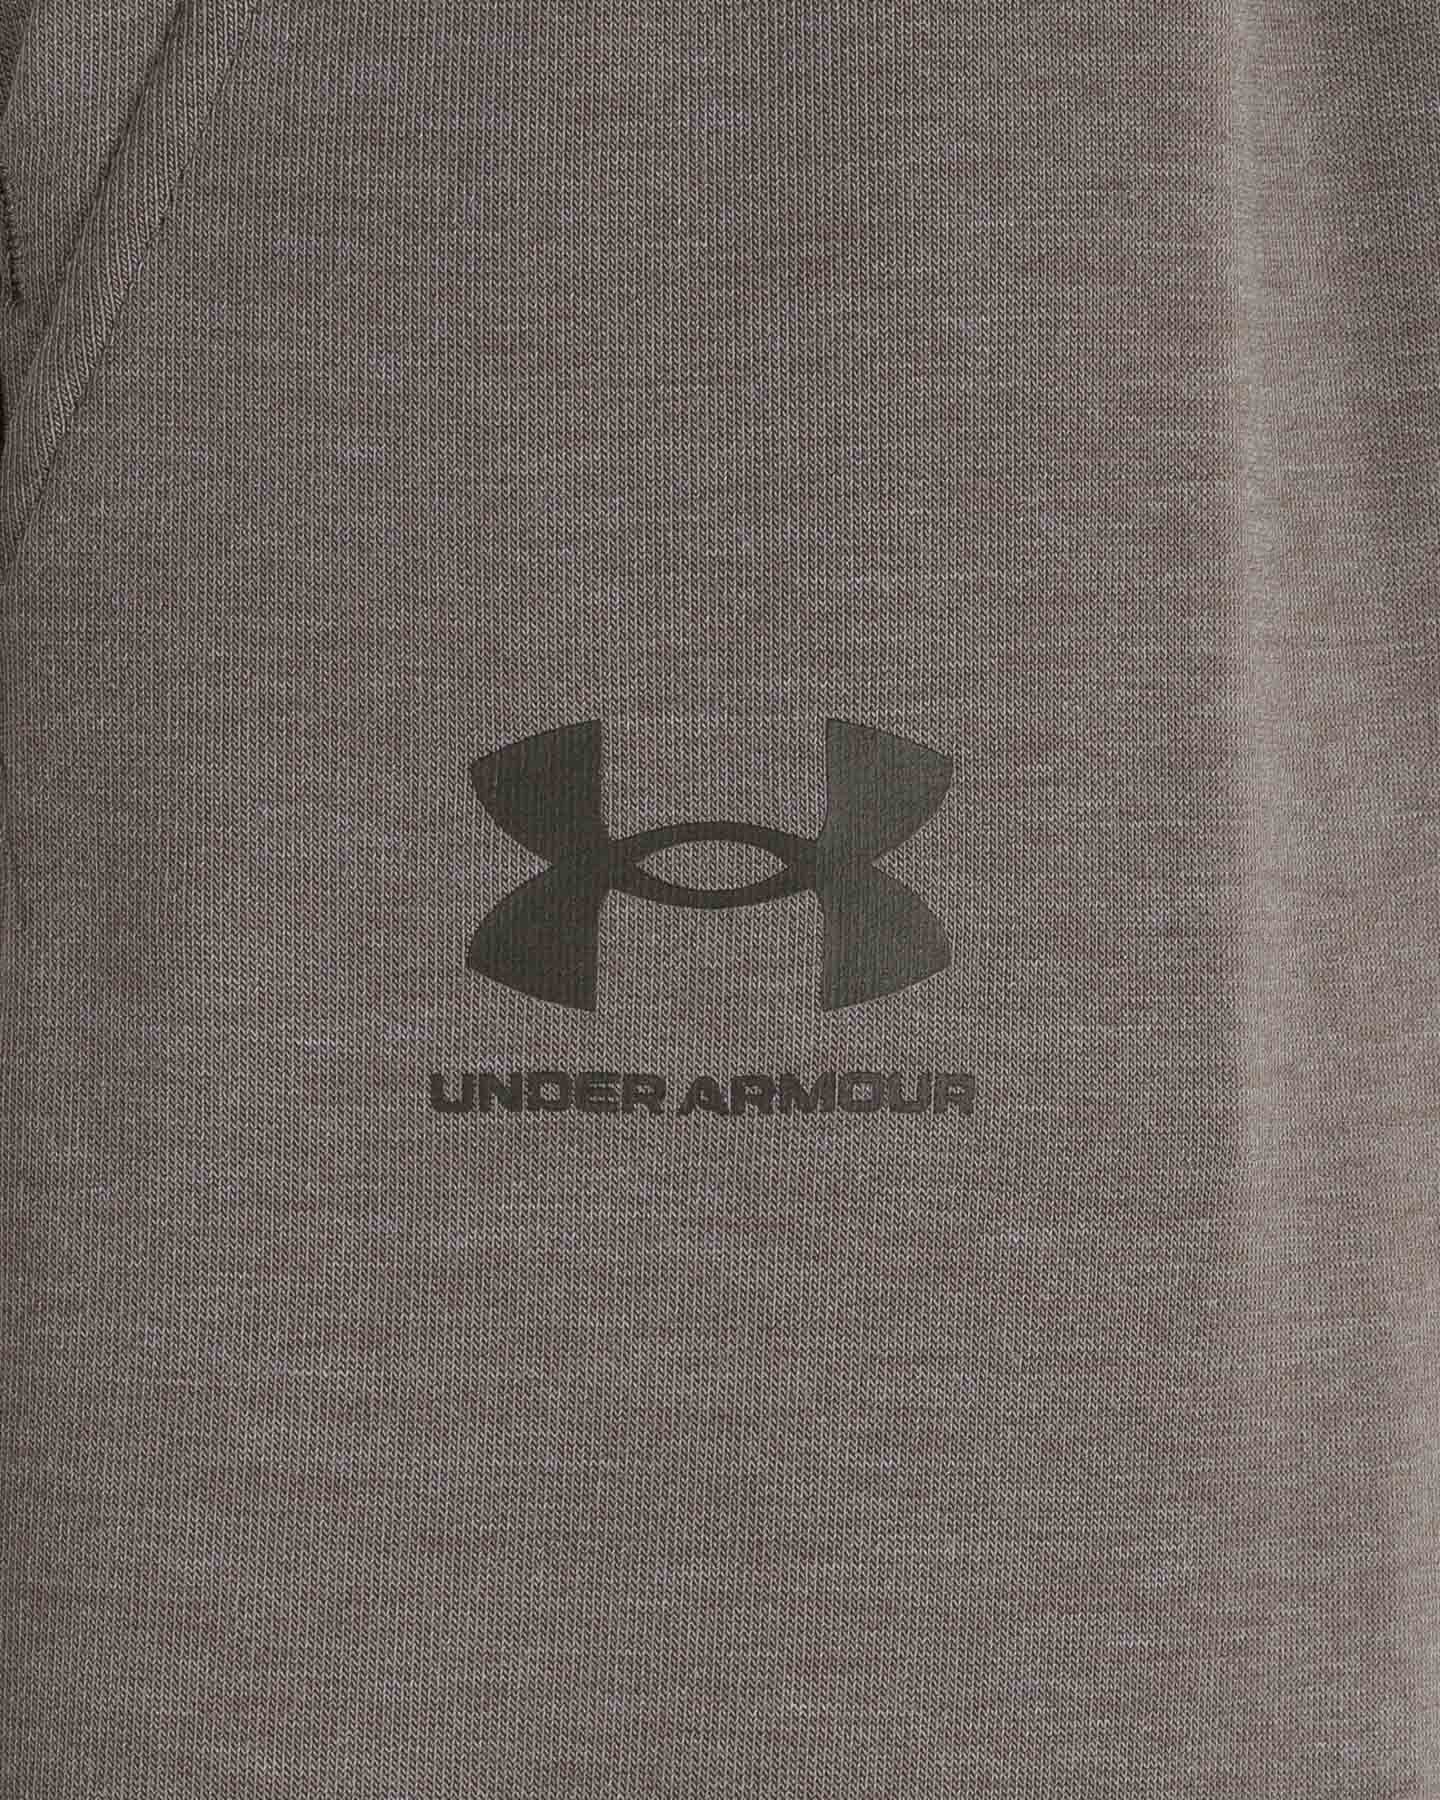  Pantalone UNDER ARMOUR CLASSIC W S5390256|0010|XS scatto 2